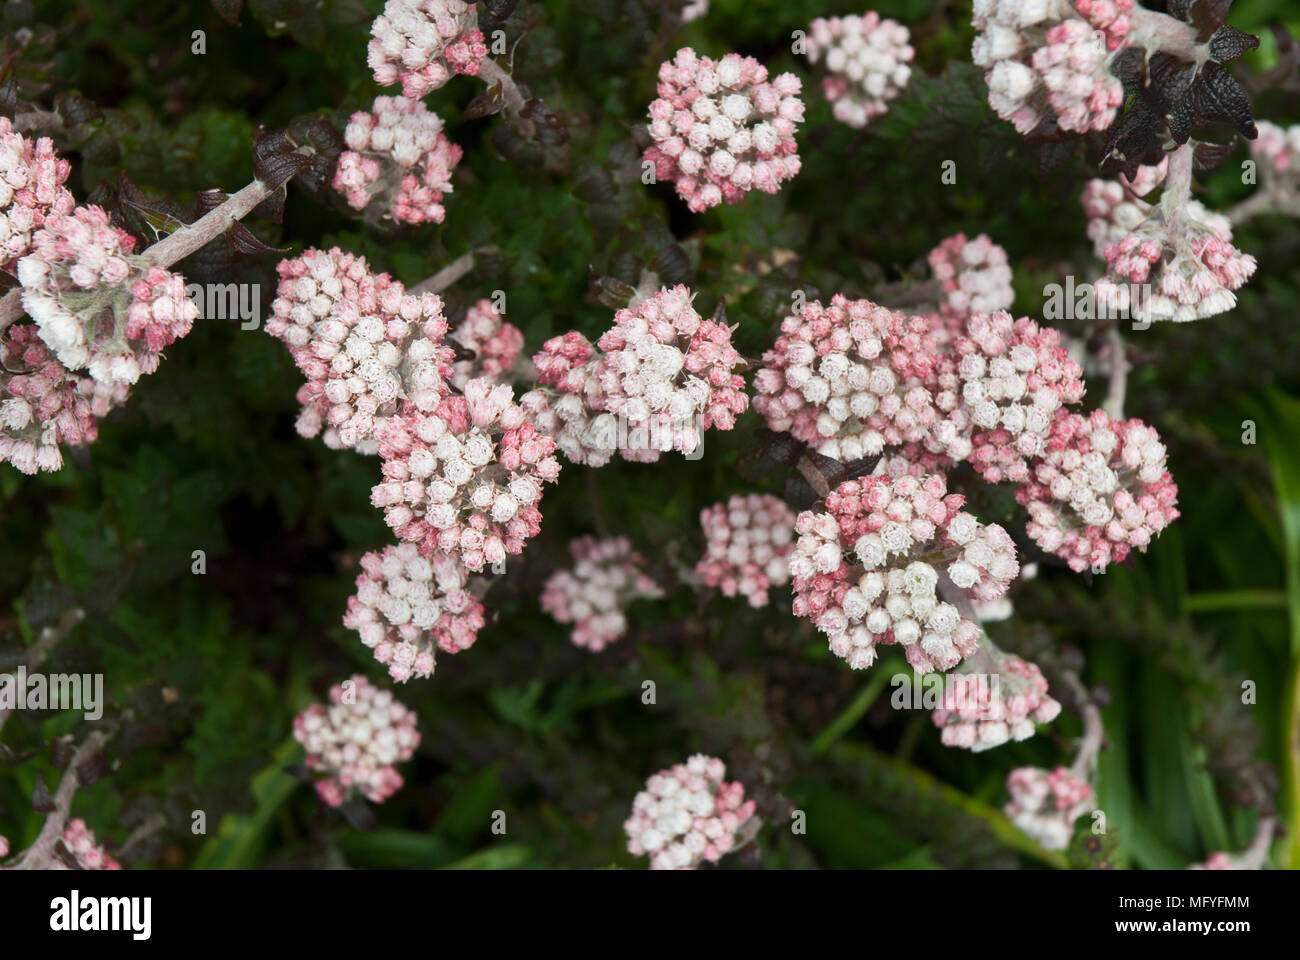 Clusters of pink yarrow or achillea millefolium with pink and white florets and fern like foliage. Stock Photo